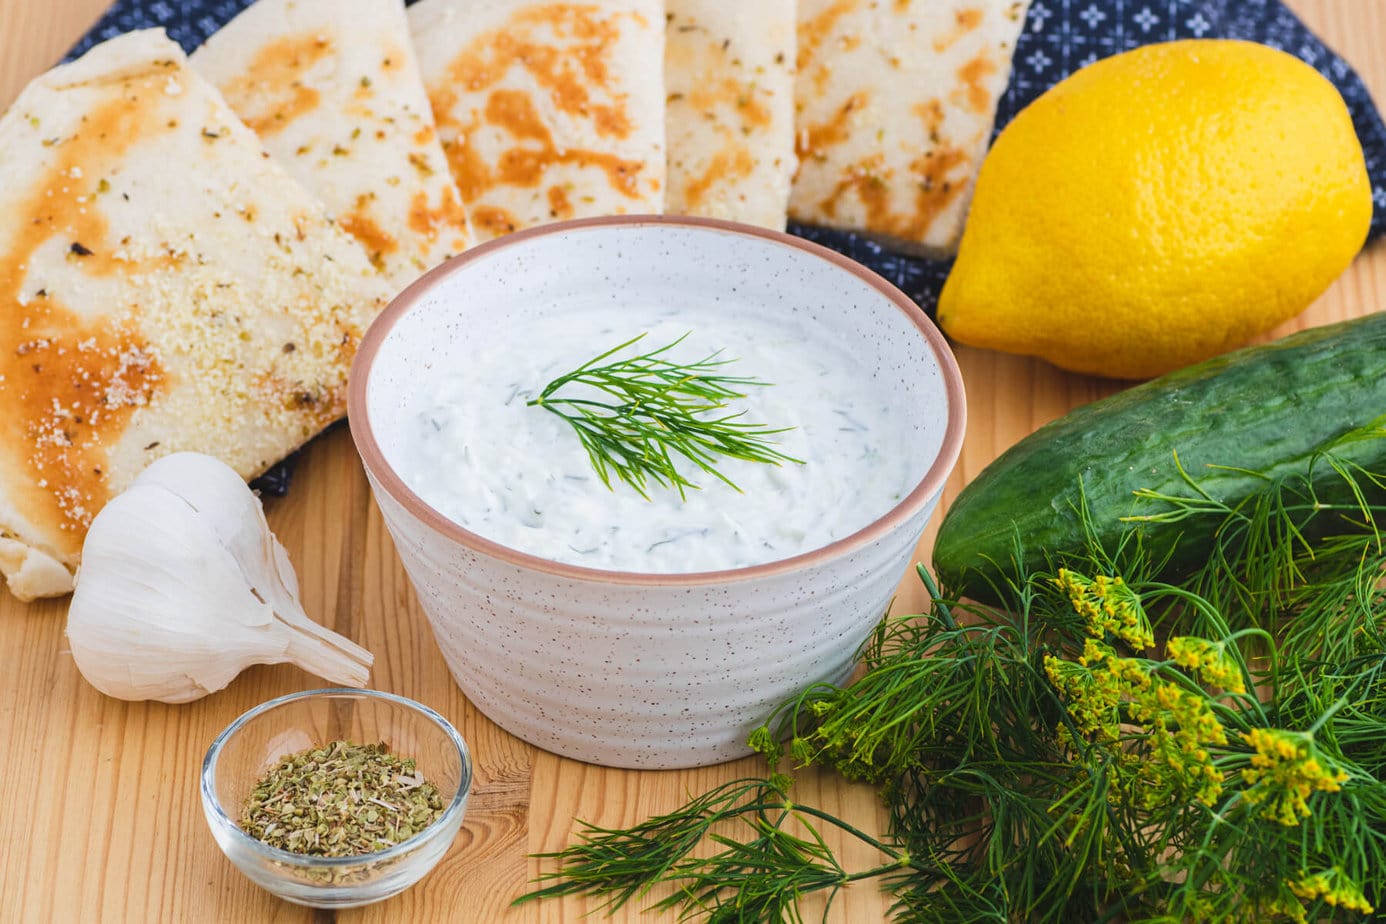 A small bowl of creamy white Tzatziki sauce flecked with cucumber and dill surrounded by grilled pita bread and other ingredients.